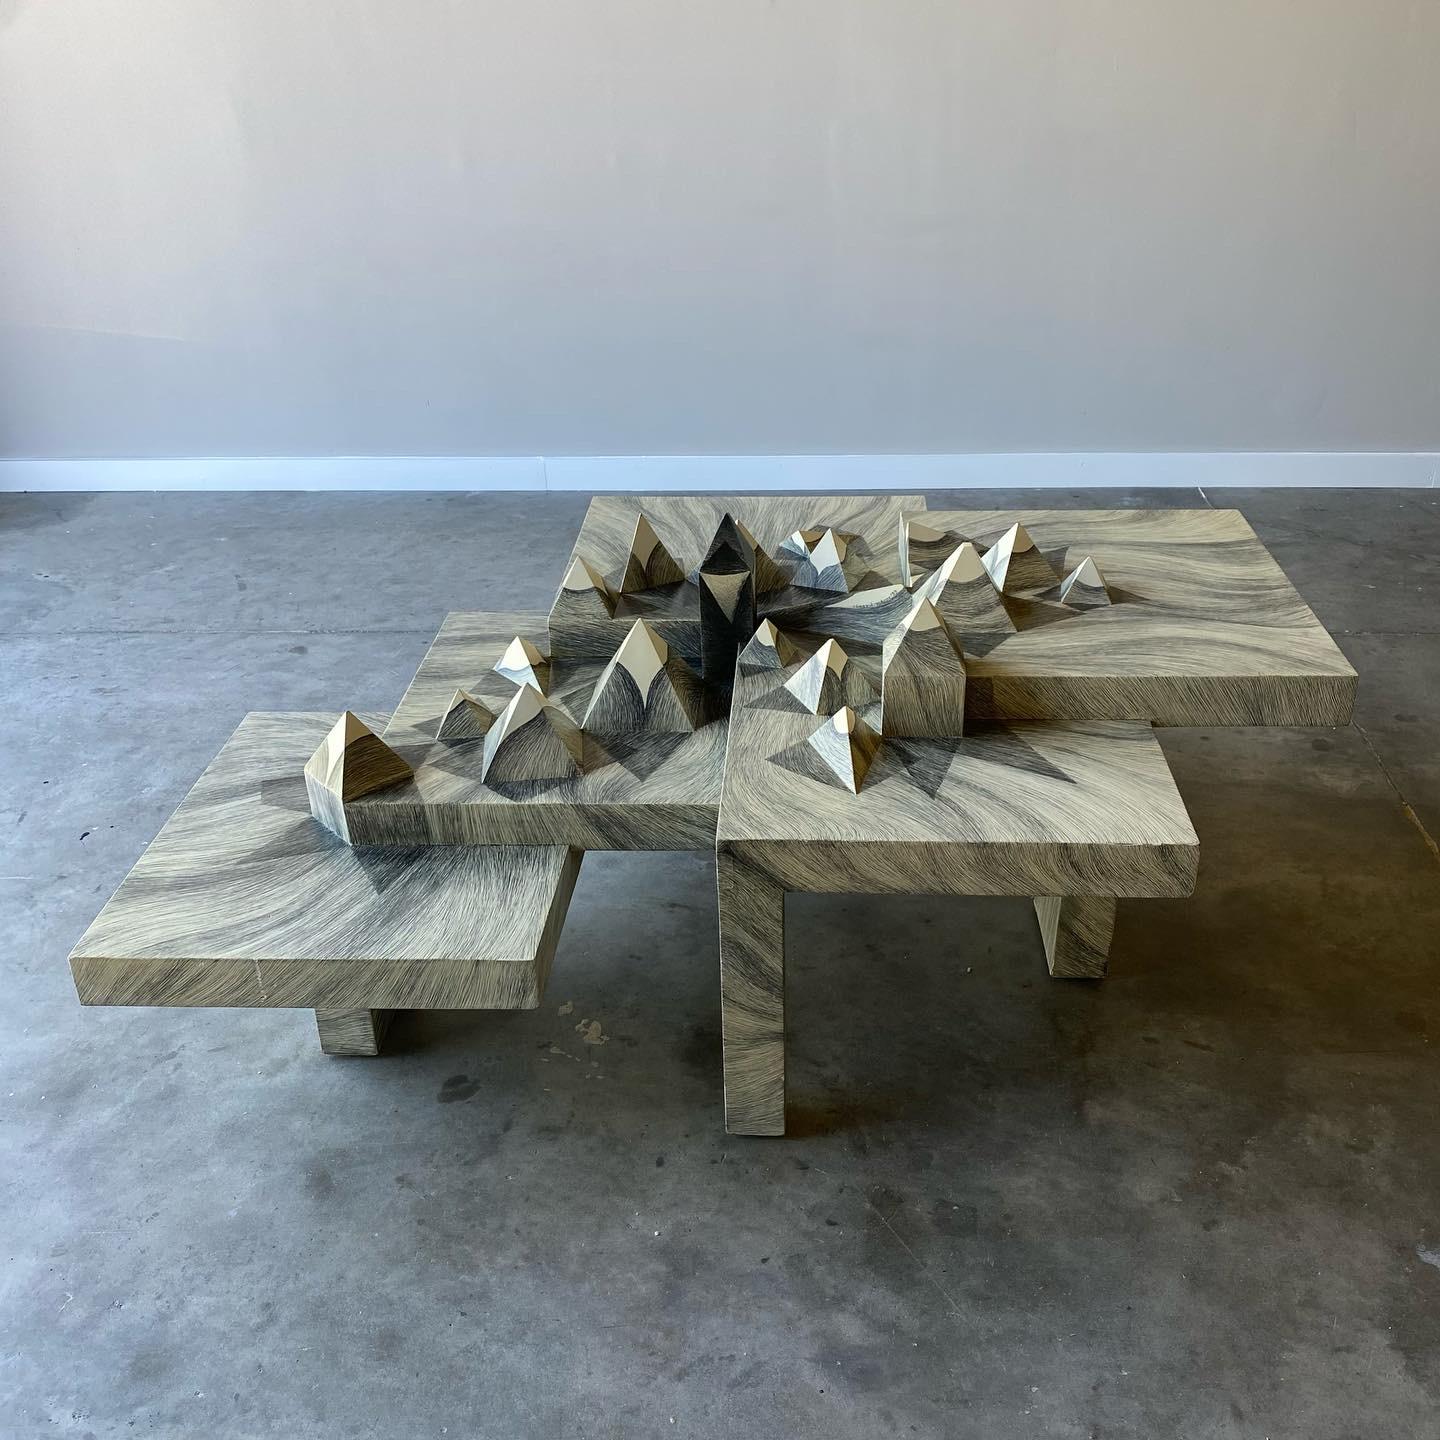 North American Sculptural Coffee Table, Edward Rokosz, 1993 For Sale